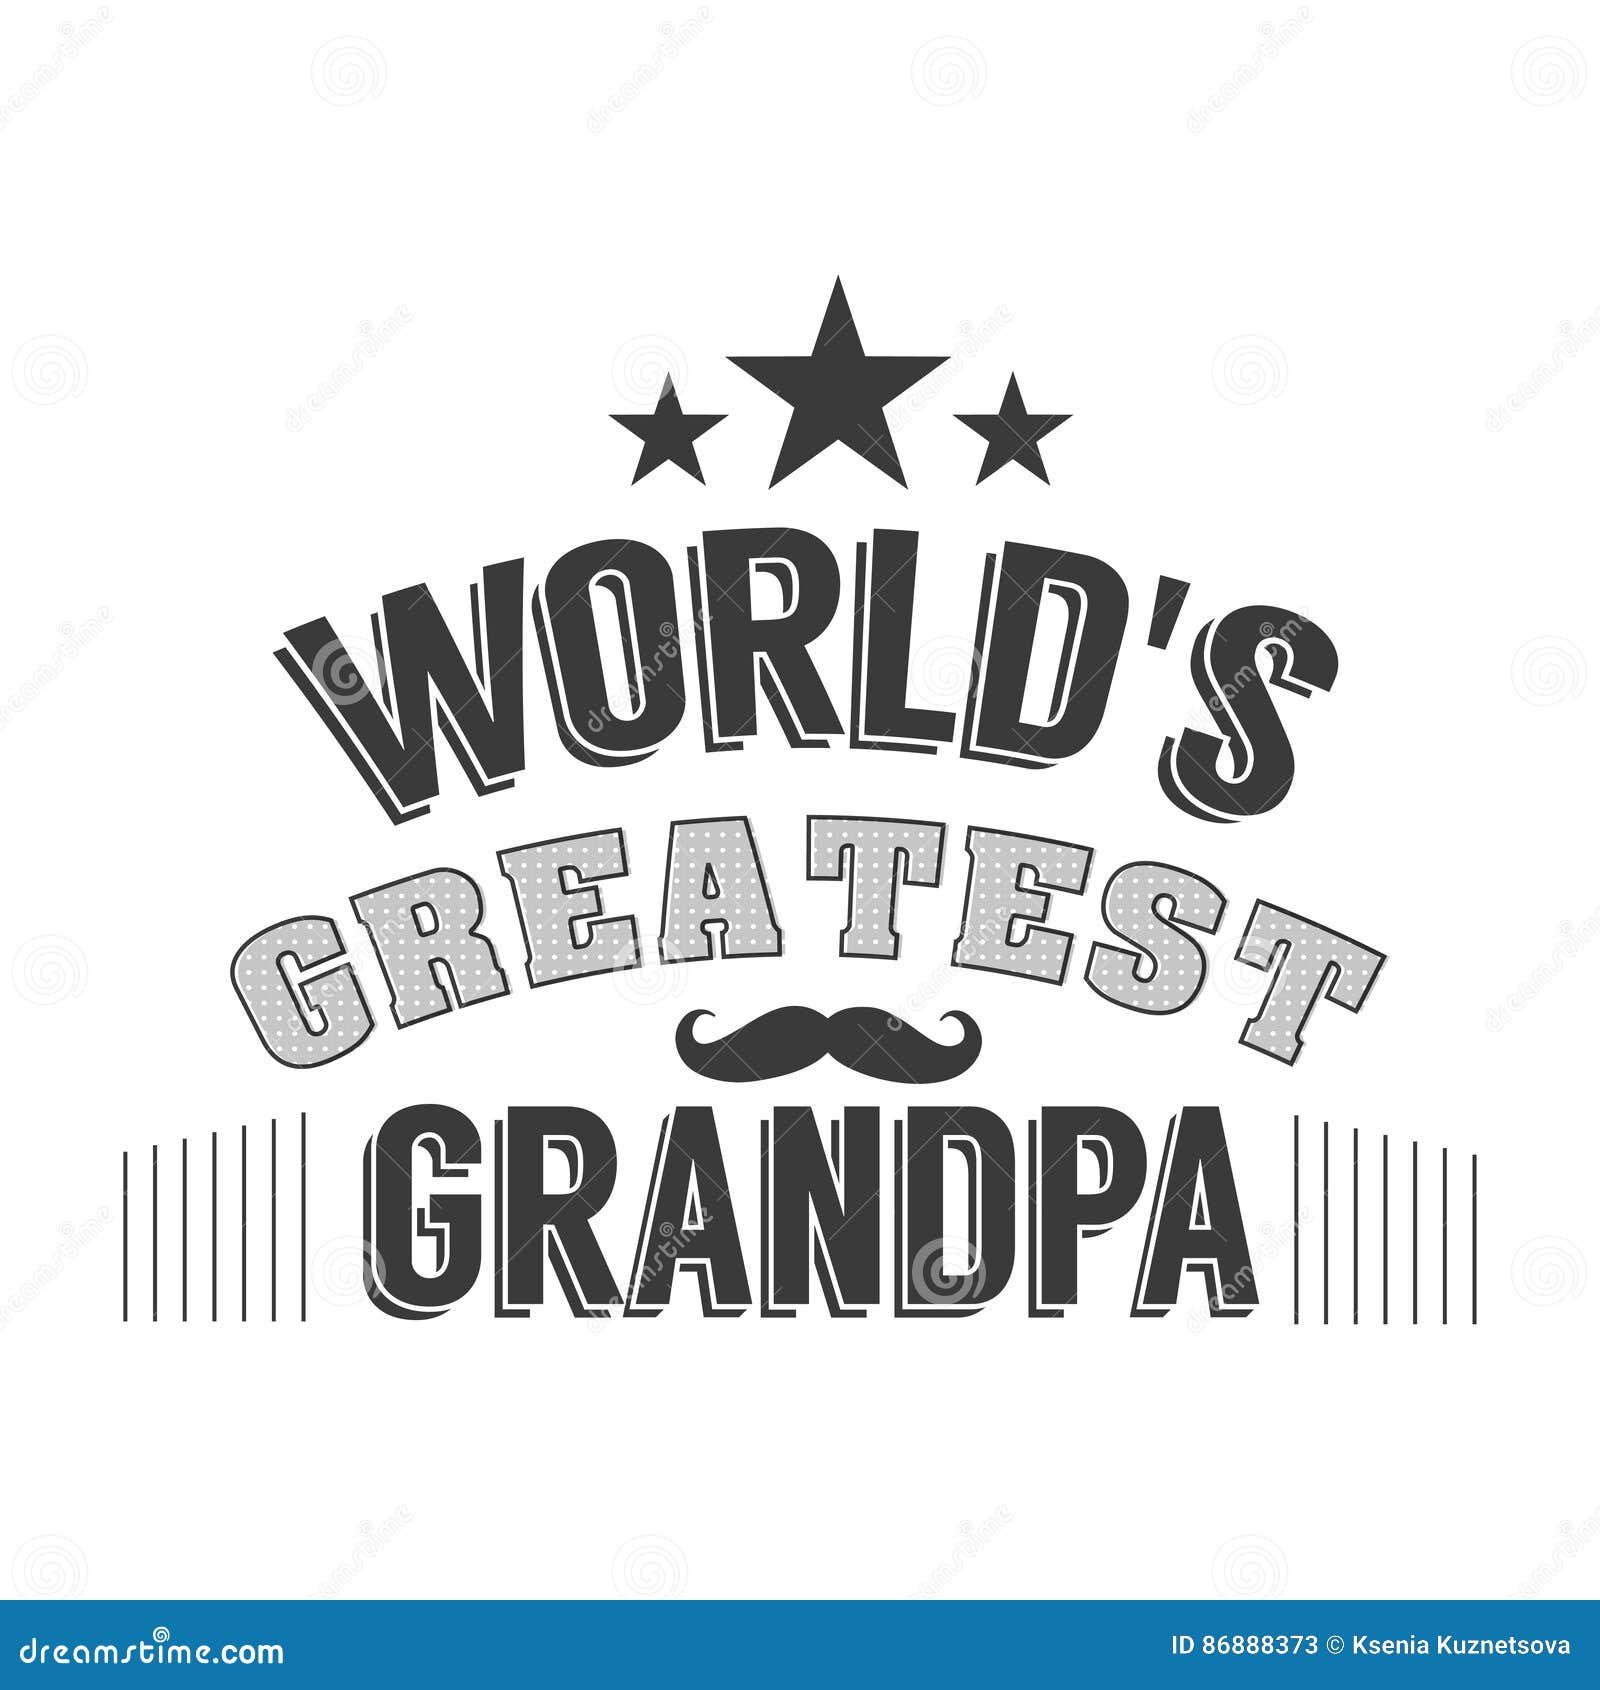 Download Isolated Grandparents Day Quotes On The White Background World S Greatest Grandpa Congratulations Granddad Label Stock Vector Illustration Of Handsome Grandfather 86888373